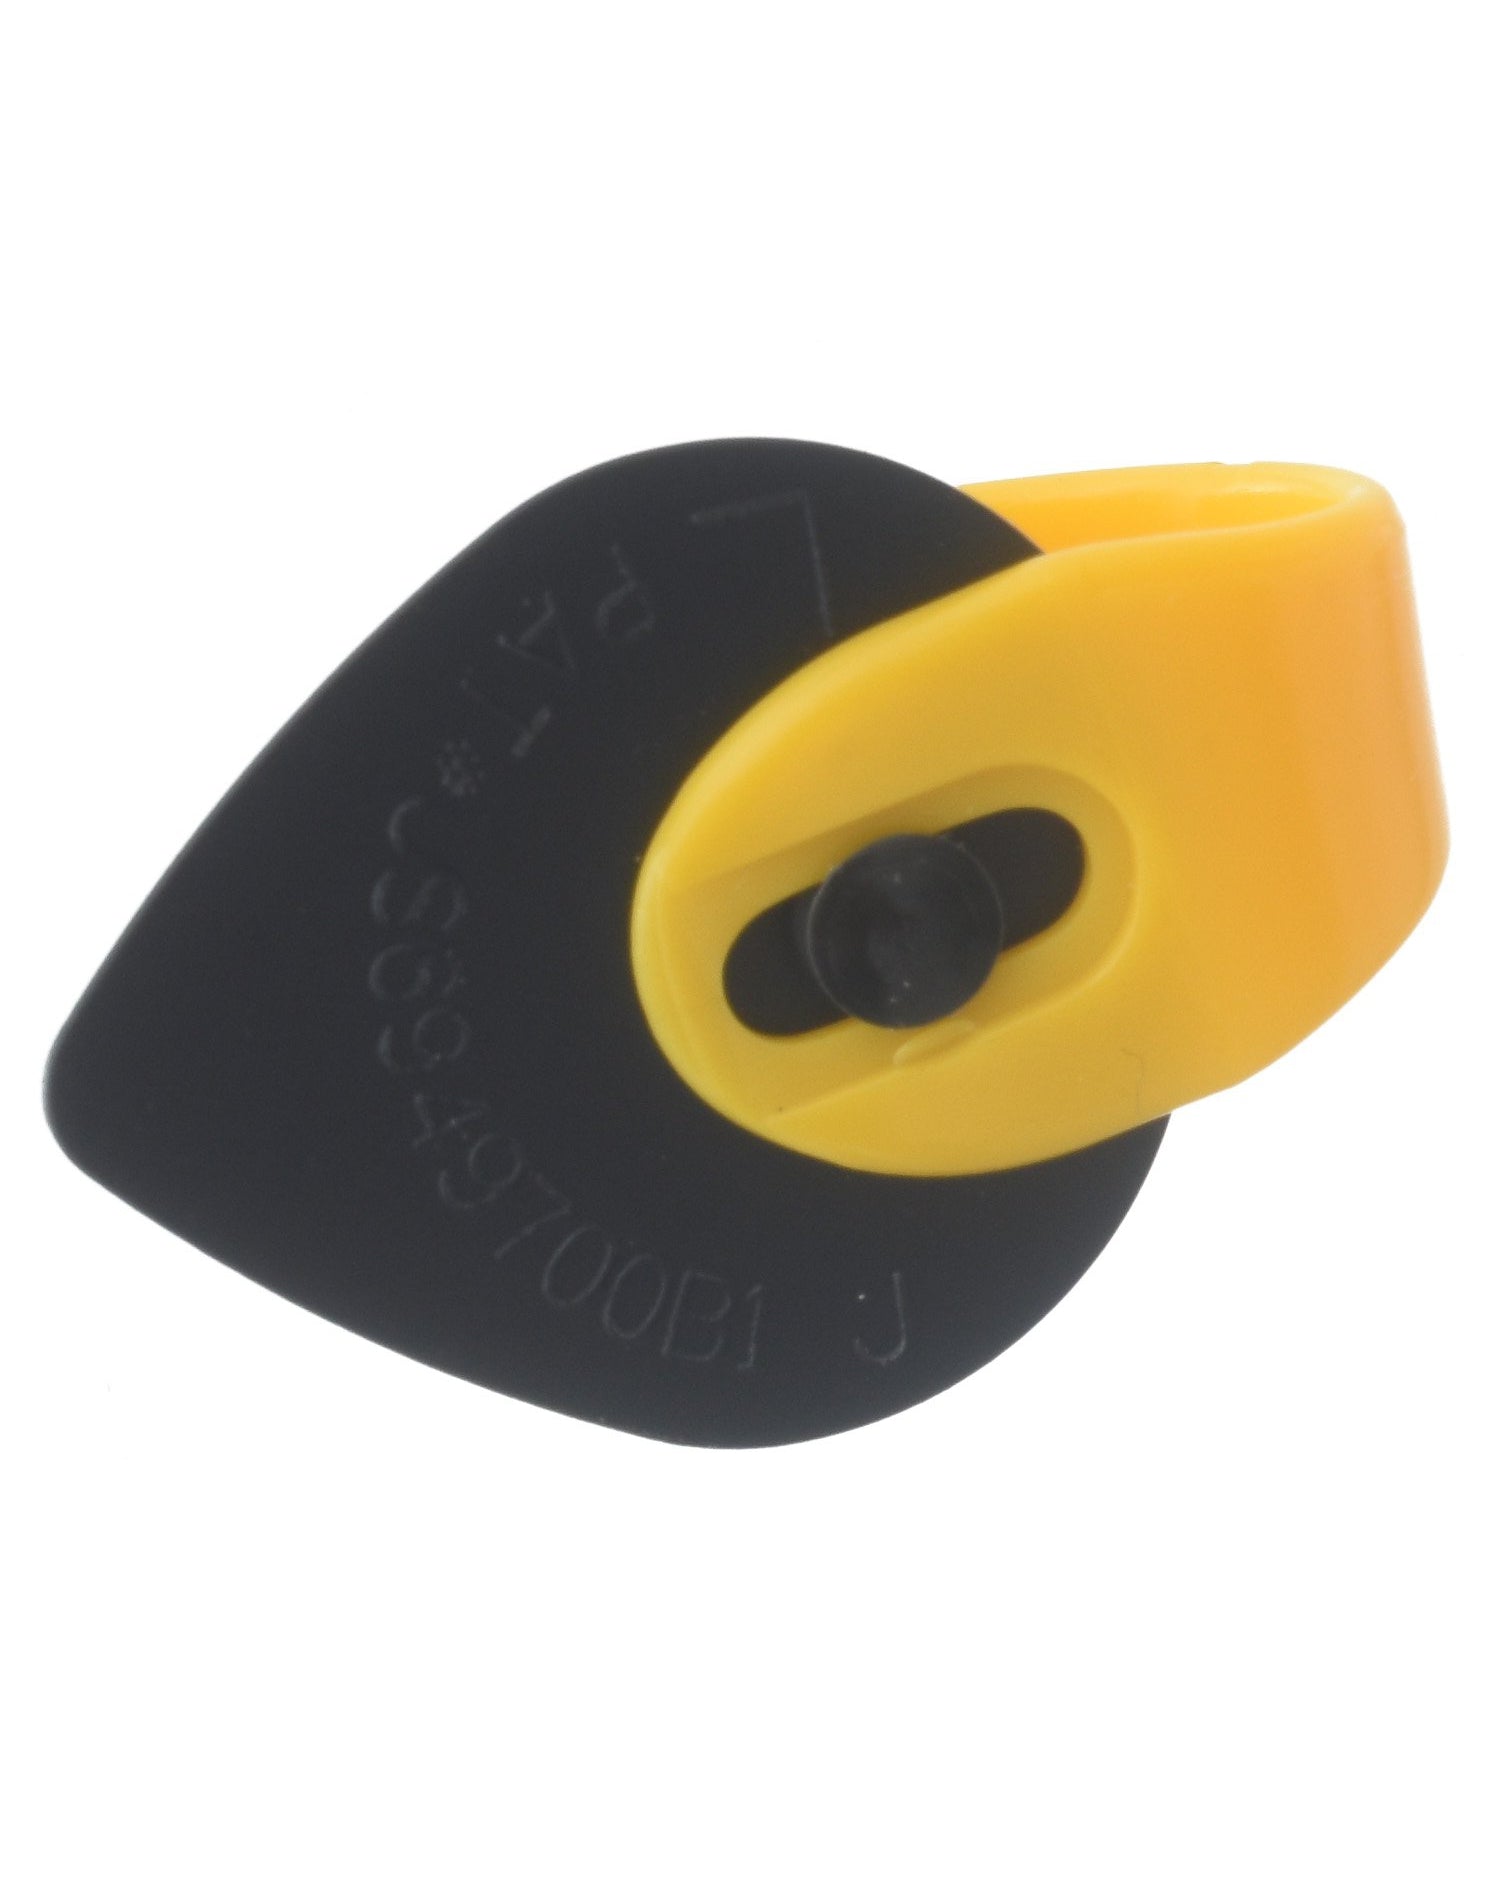 Image 1 of Fred Kelly Delrin Heavy Gauge Bumble Bee Jazz Pick - SKU# PKBBJ-H : Product Type Accessories & Parts : Elderly Instruments